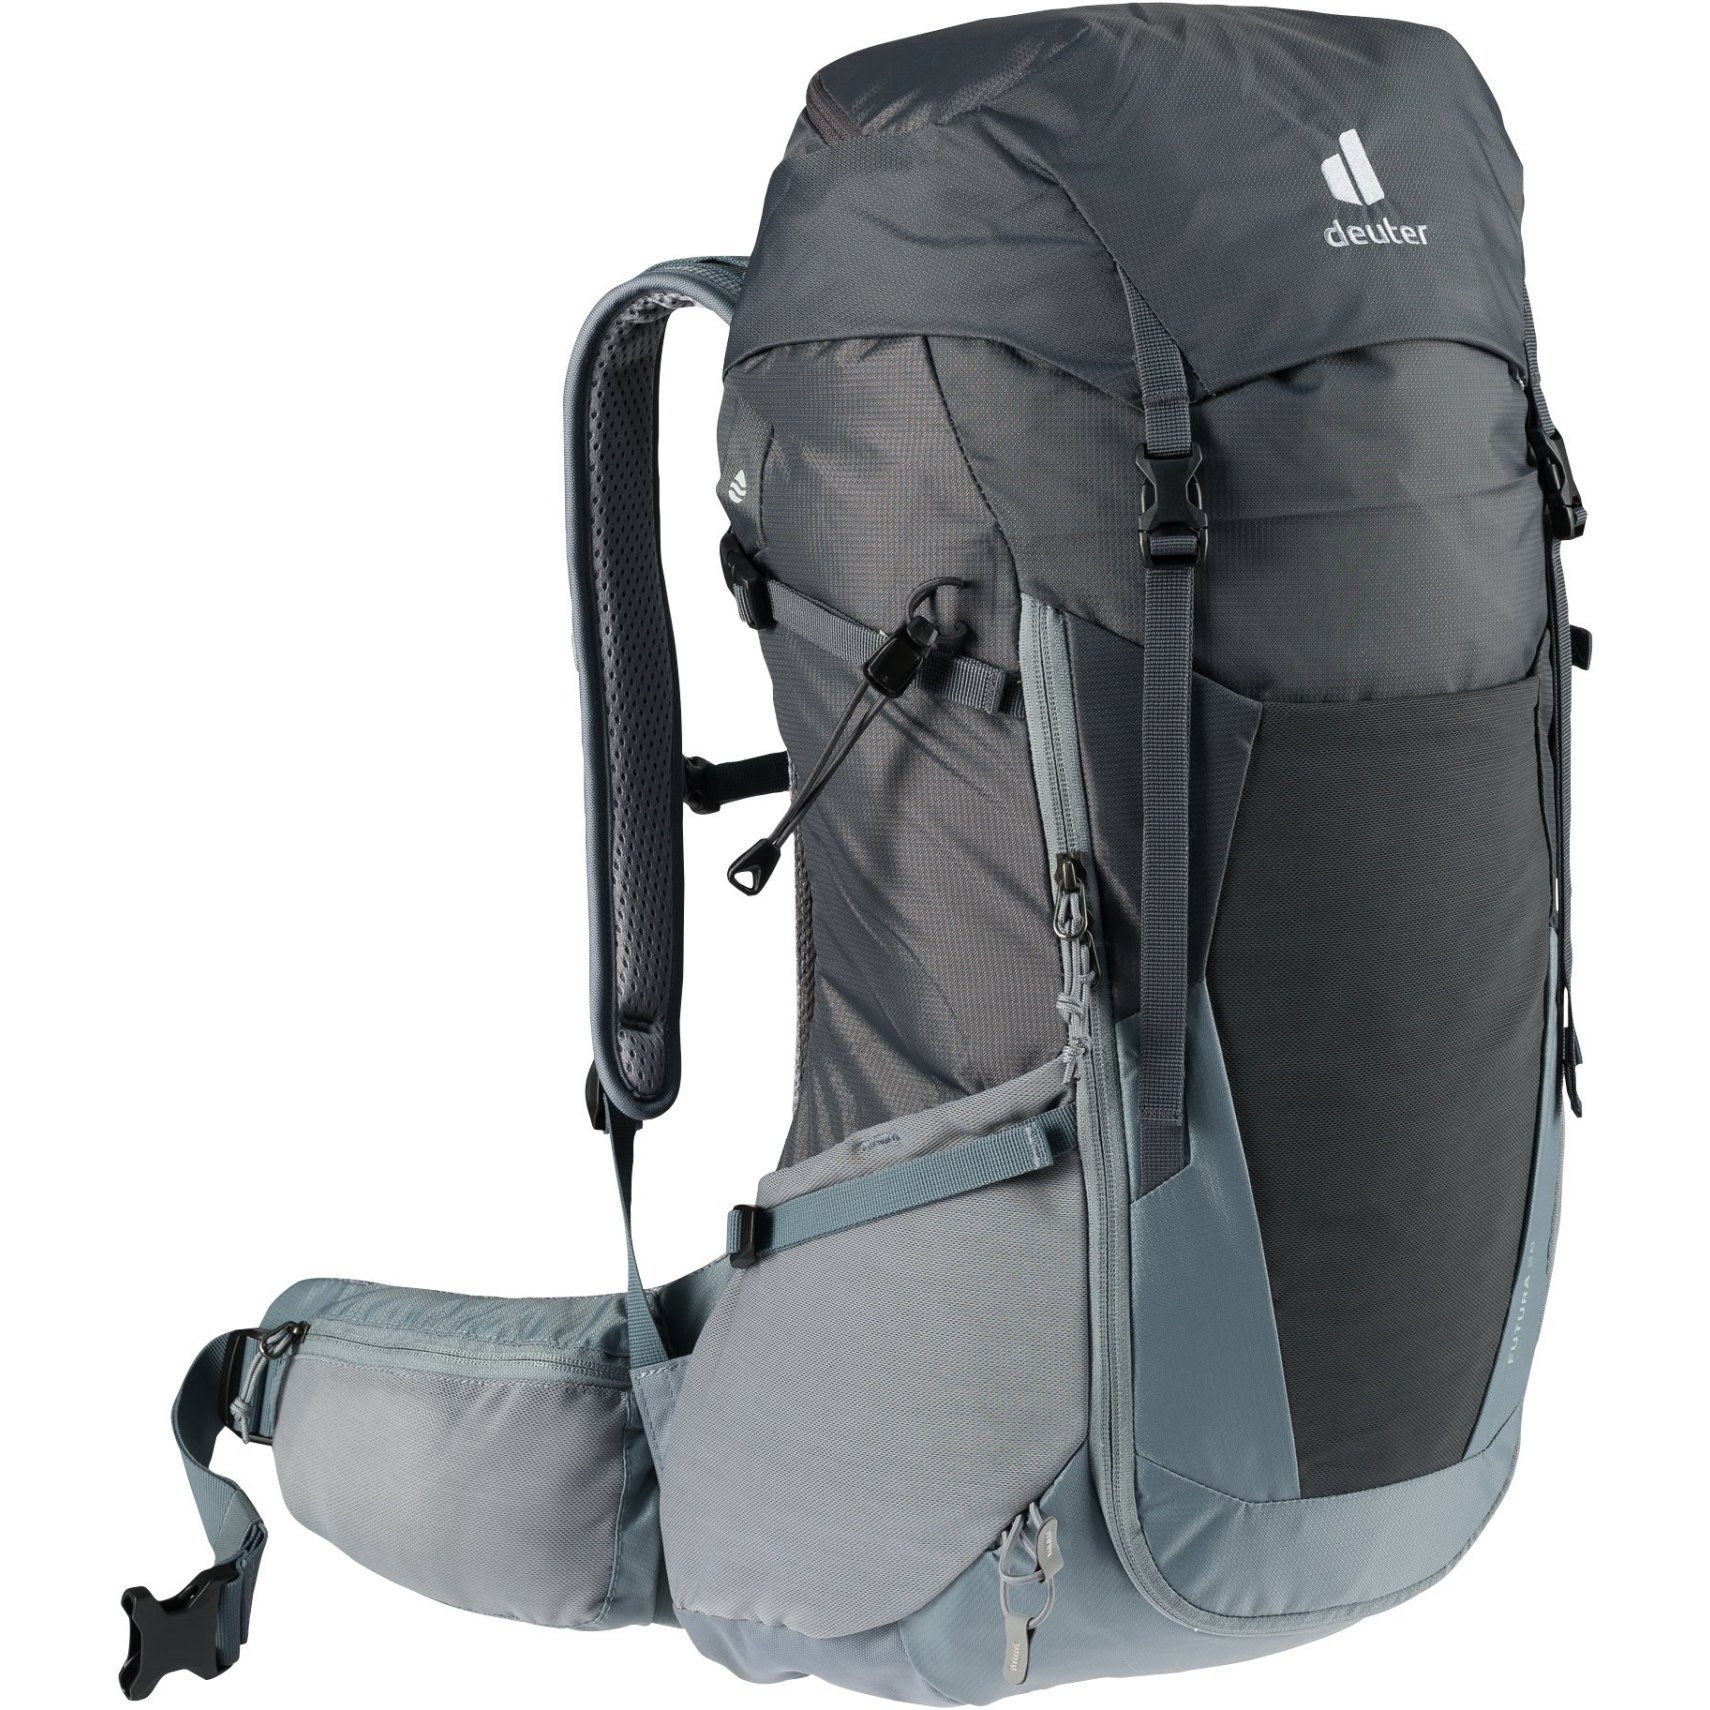 Picture of Deuter Futura 26 Backpack - graphite-shale